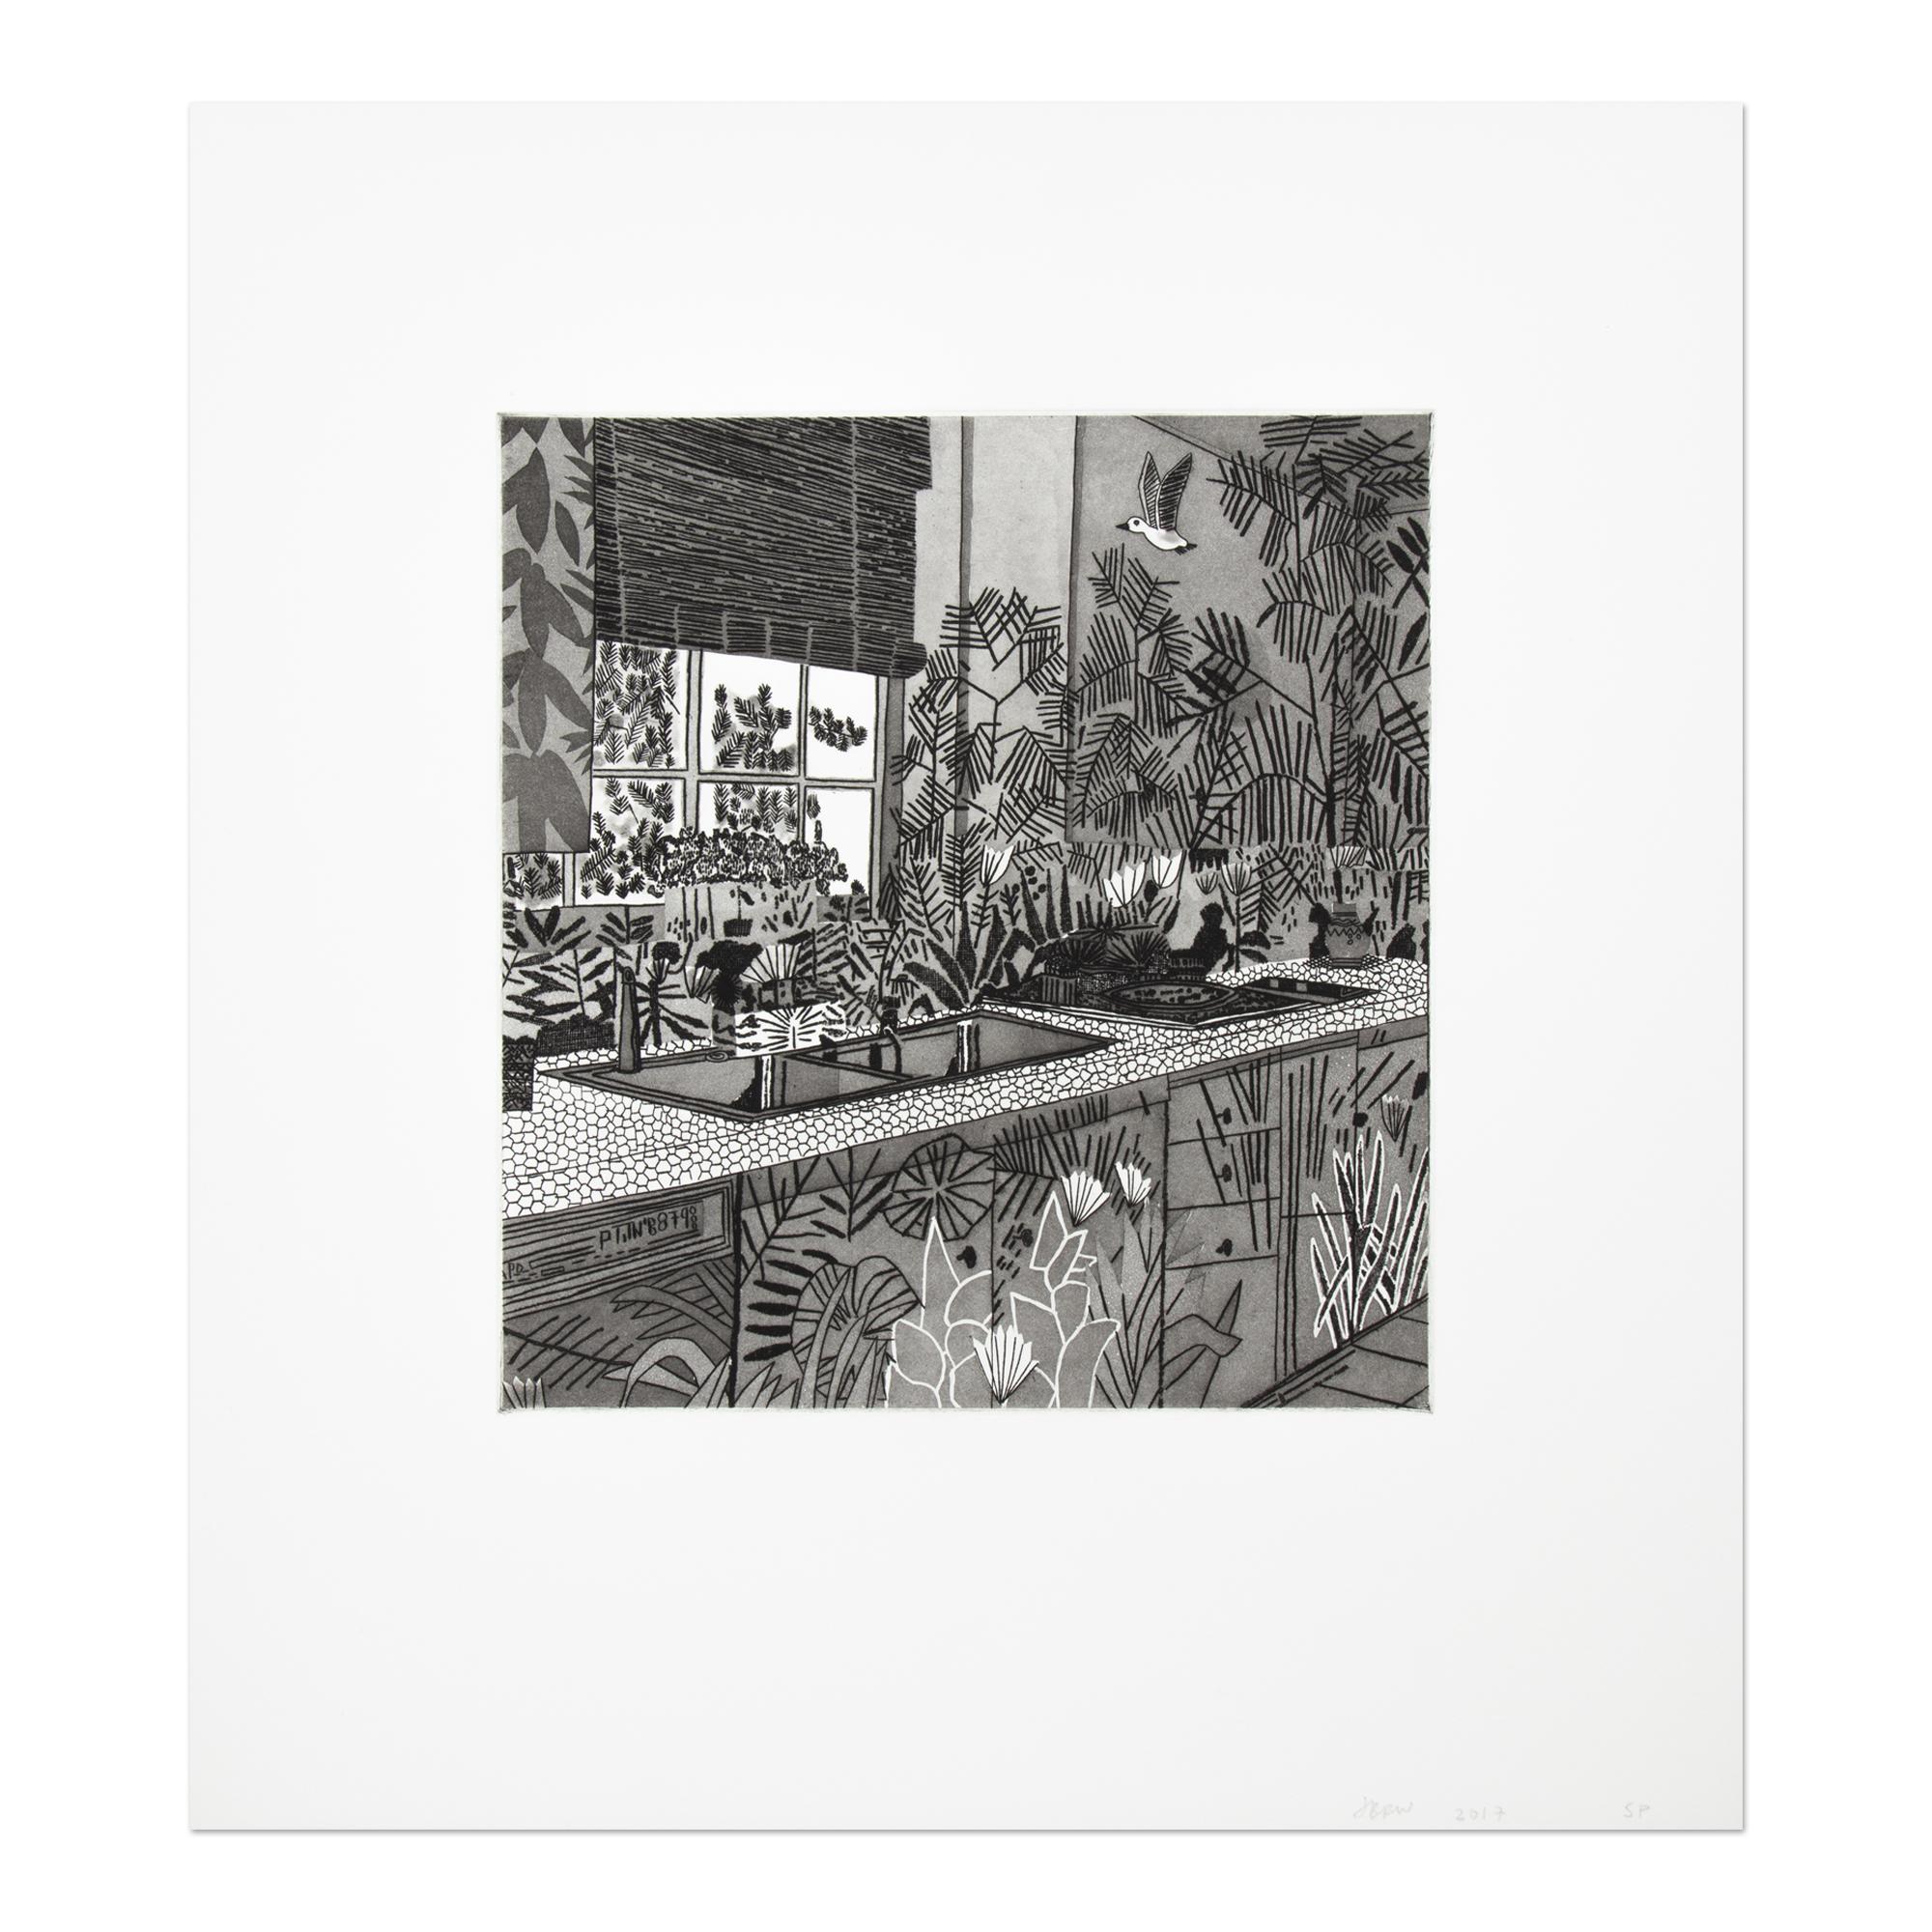 Jonas Wood (American, b. 1977)
Jungle Kitchen, 2017
Medium: Etching and aquatint on Magnani Pescia paper
Dimensions: 42.2 × 38.1 cm (16 3/5 × 15 in)
Edition of 30: Hand signed
Publisher: WKS Editions, Los Angeles
Literature: Jonas Wood Prints,